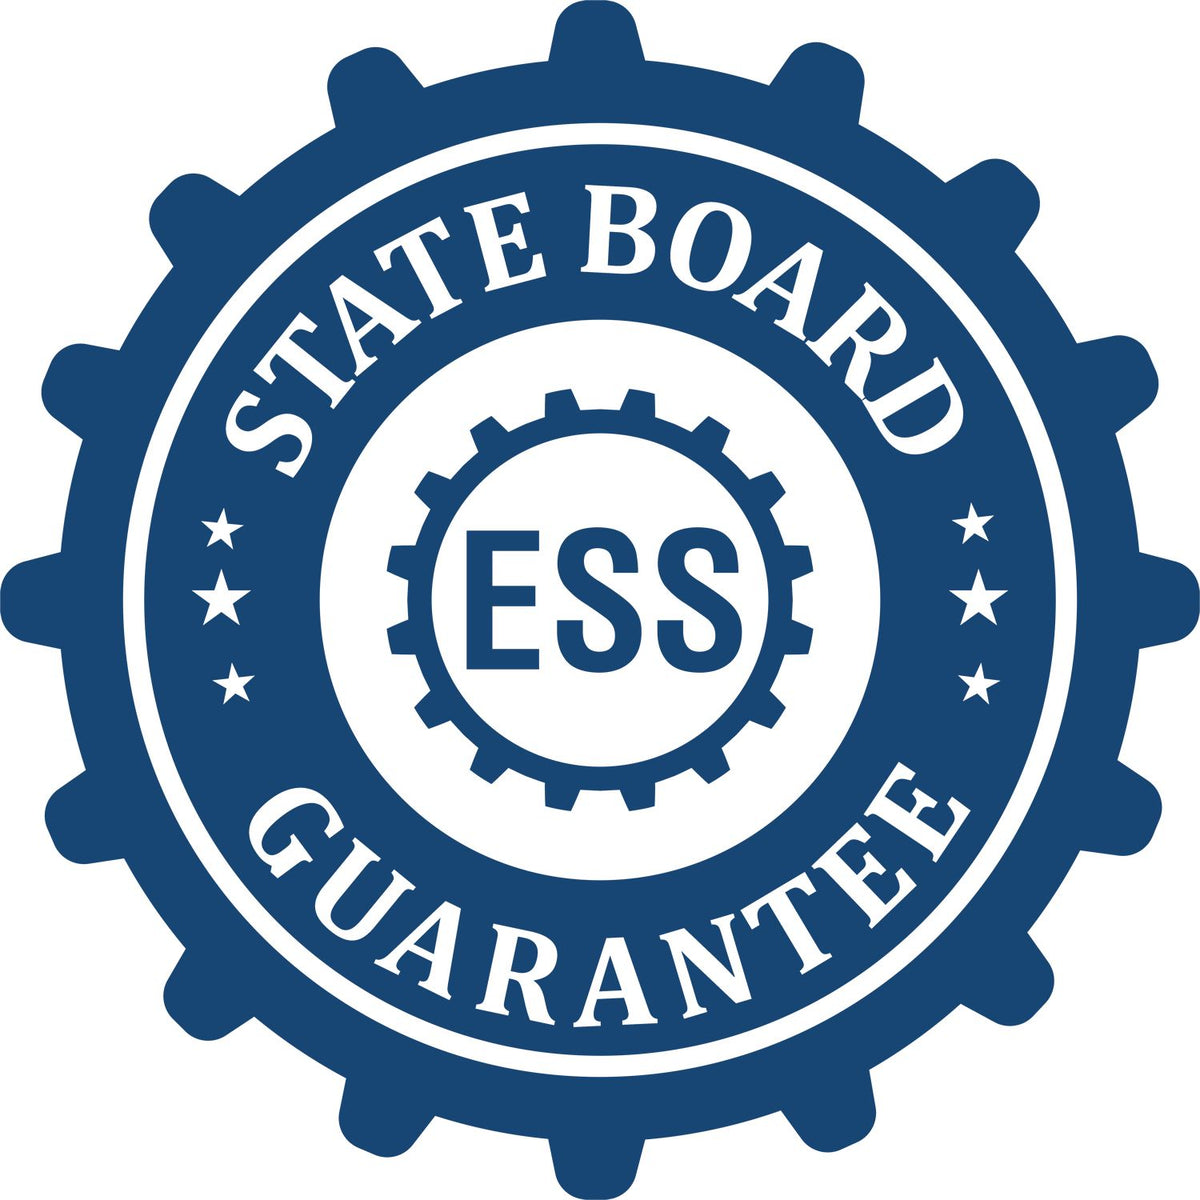 An emblem in a gear shape illustrating a state board guarantee for the Premium MaxLight Pre-Inked South Carolina Landscape Architectural Stamp product.